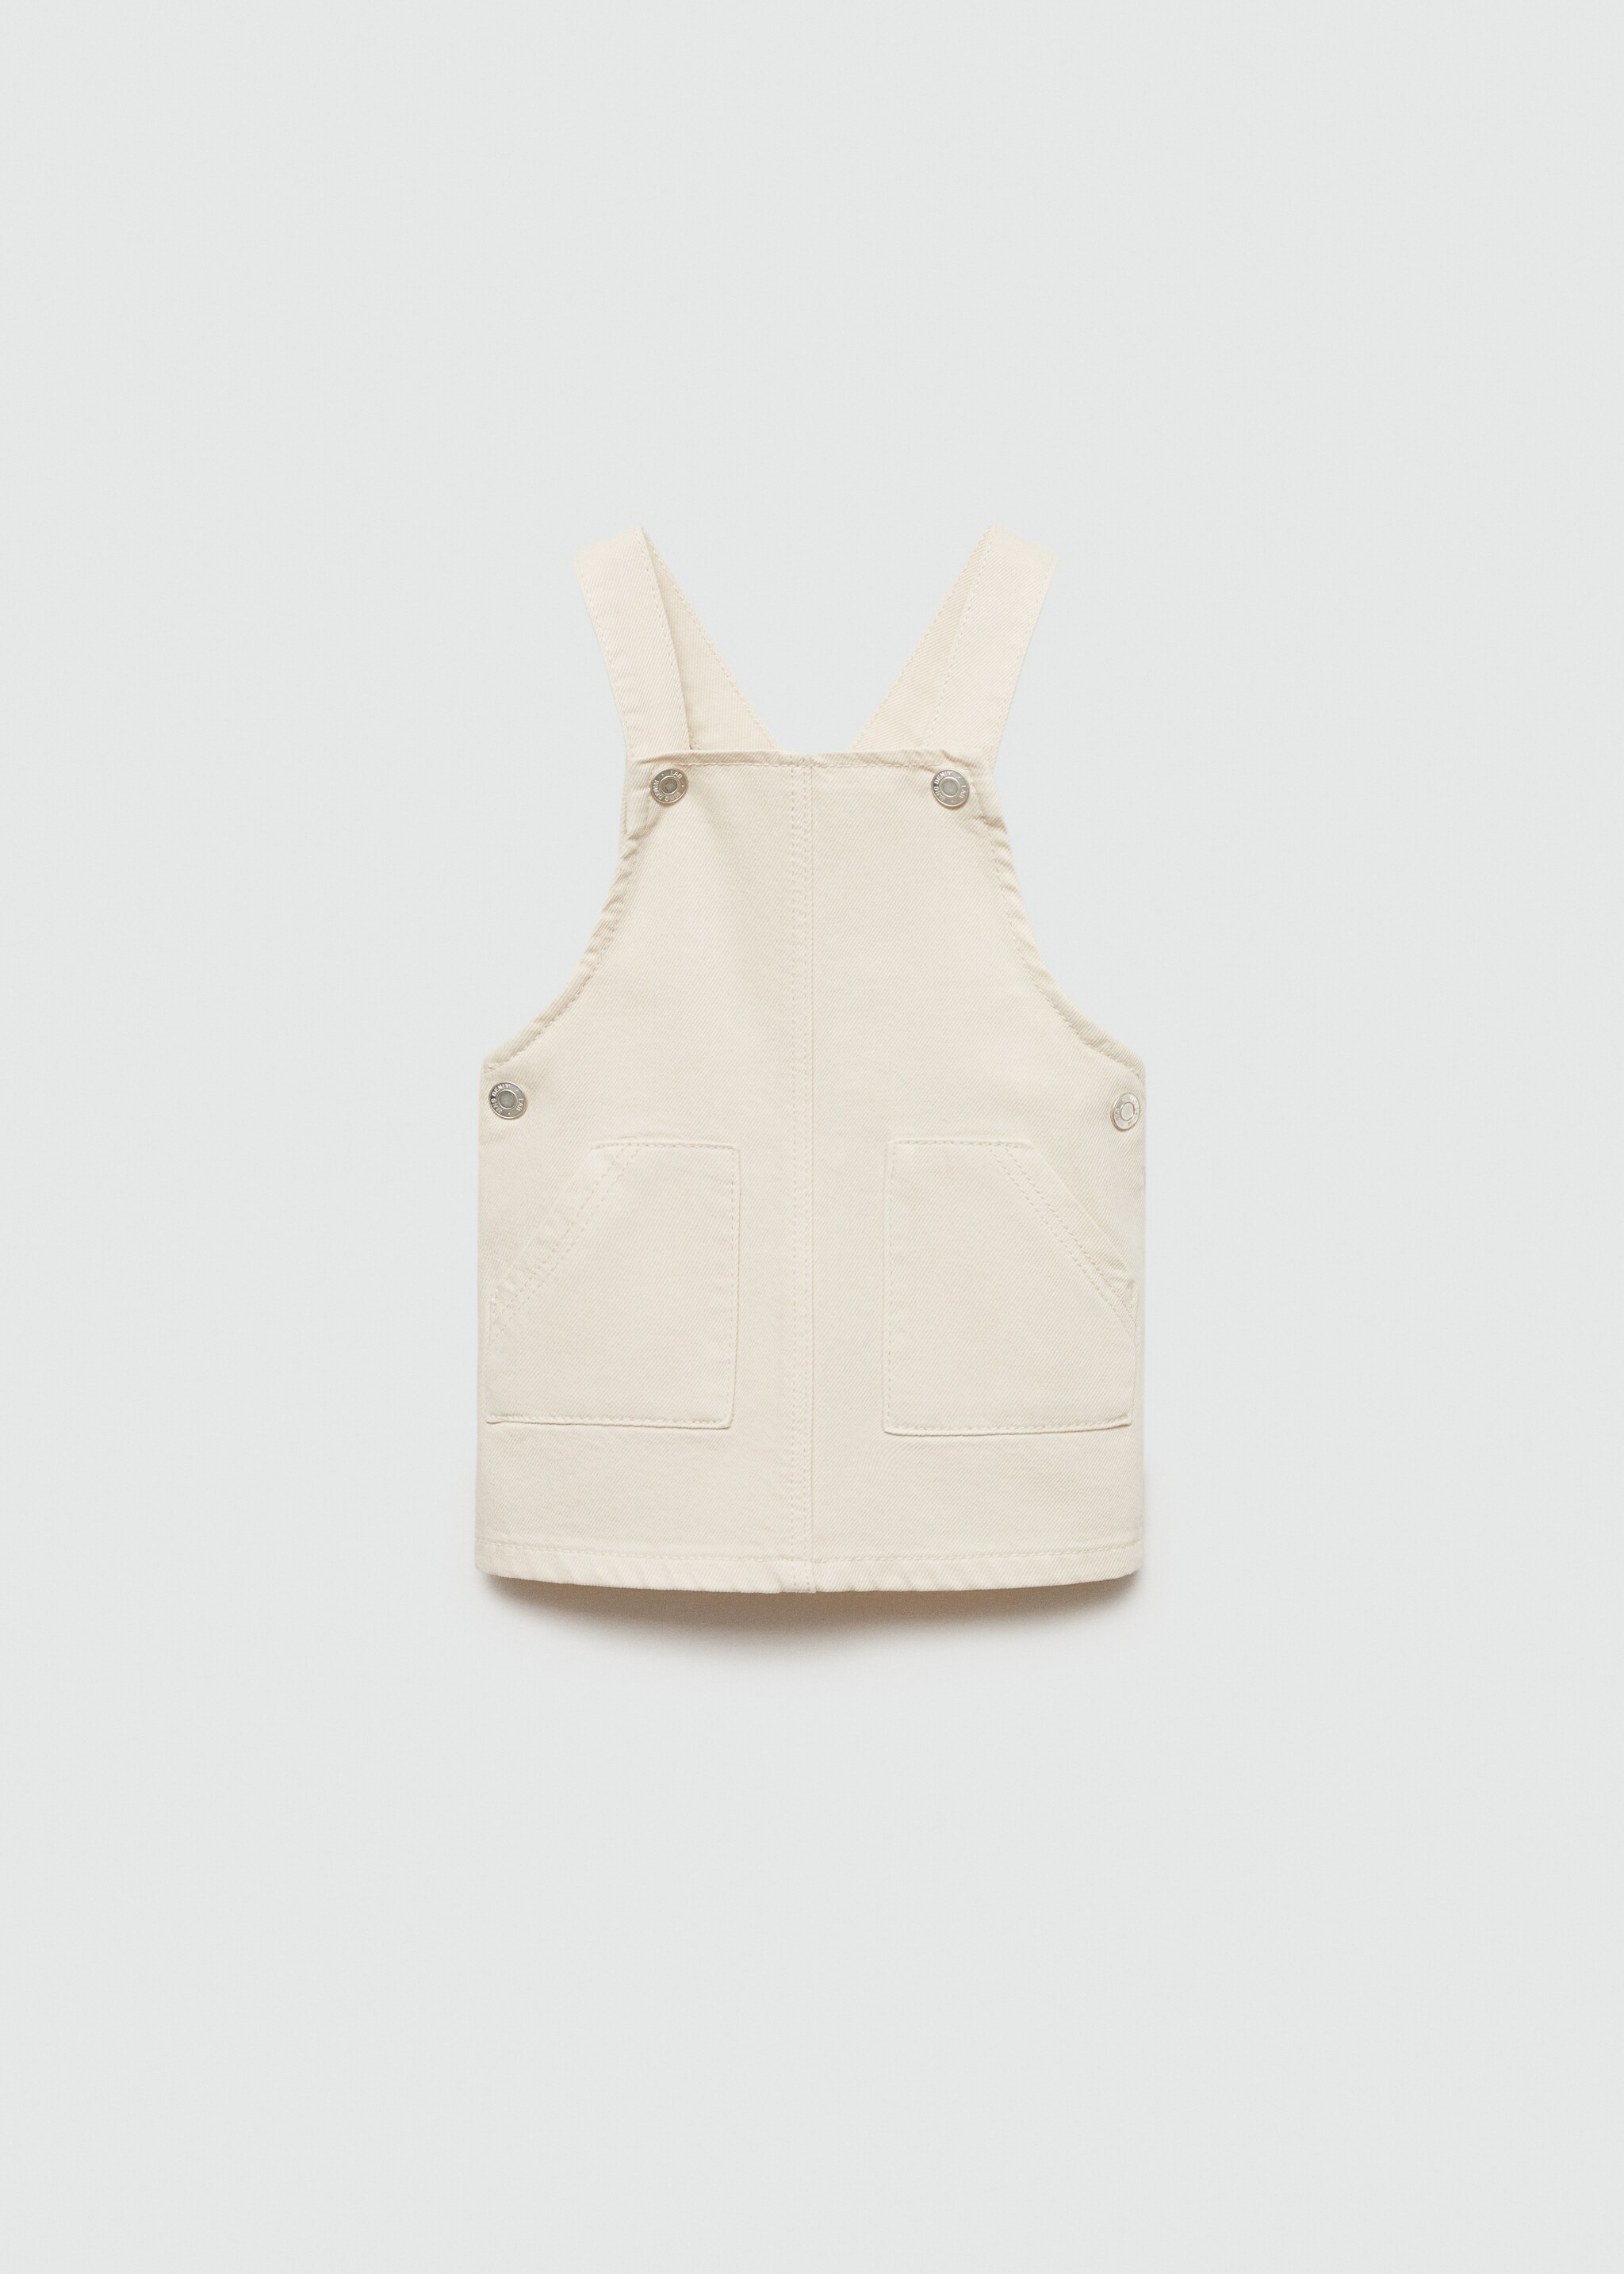 Short denim pinafore - Article without model